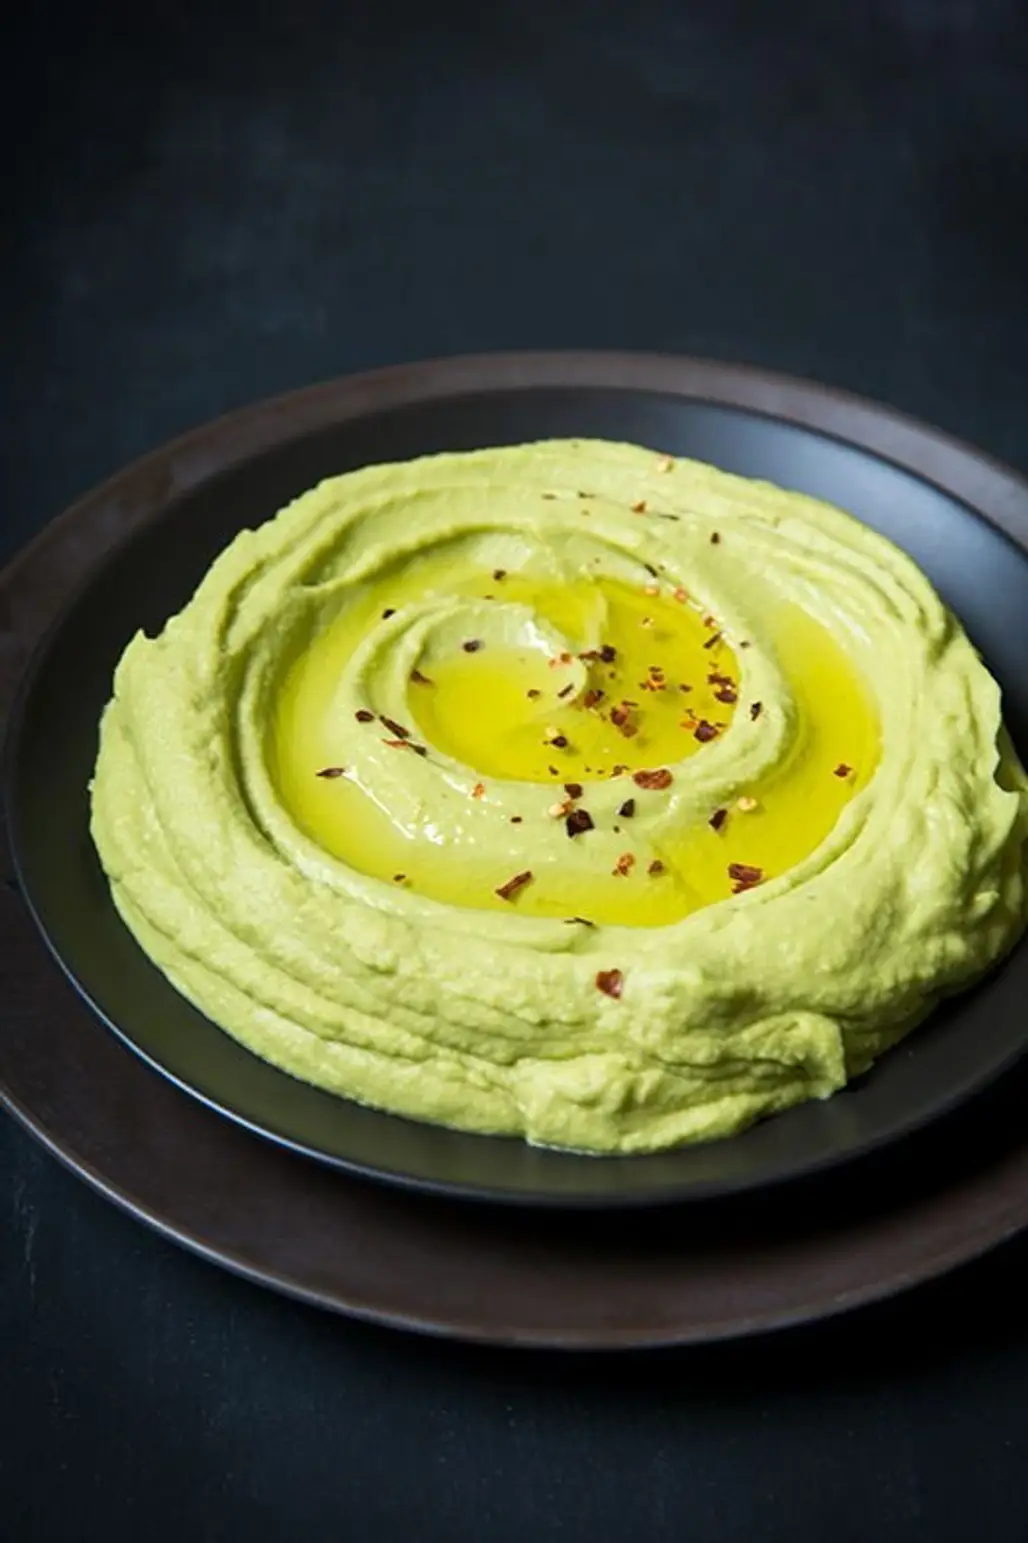 Hummus Made from Anything but Chickpeas